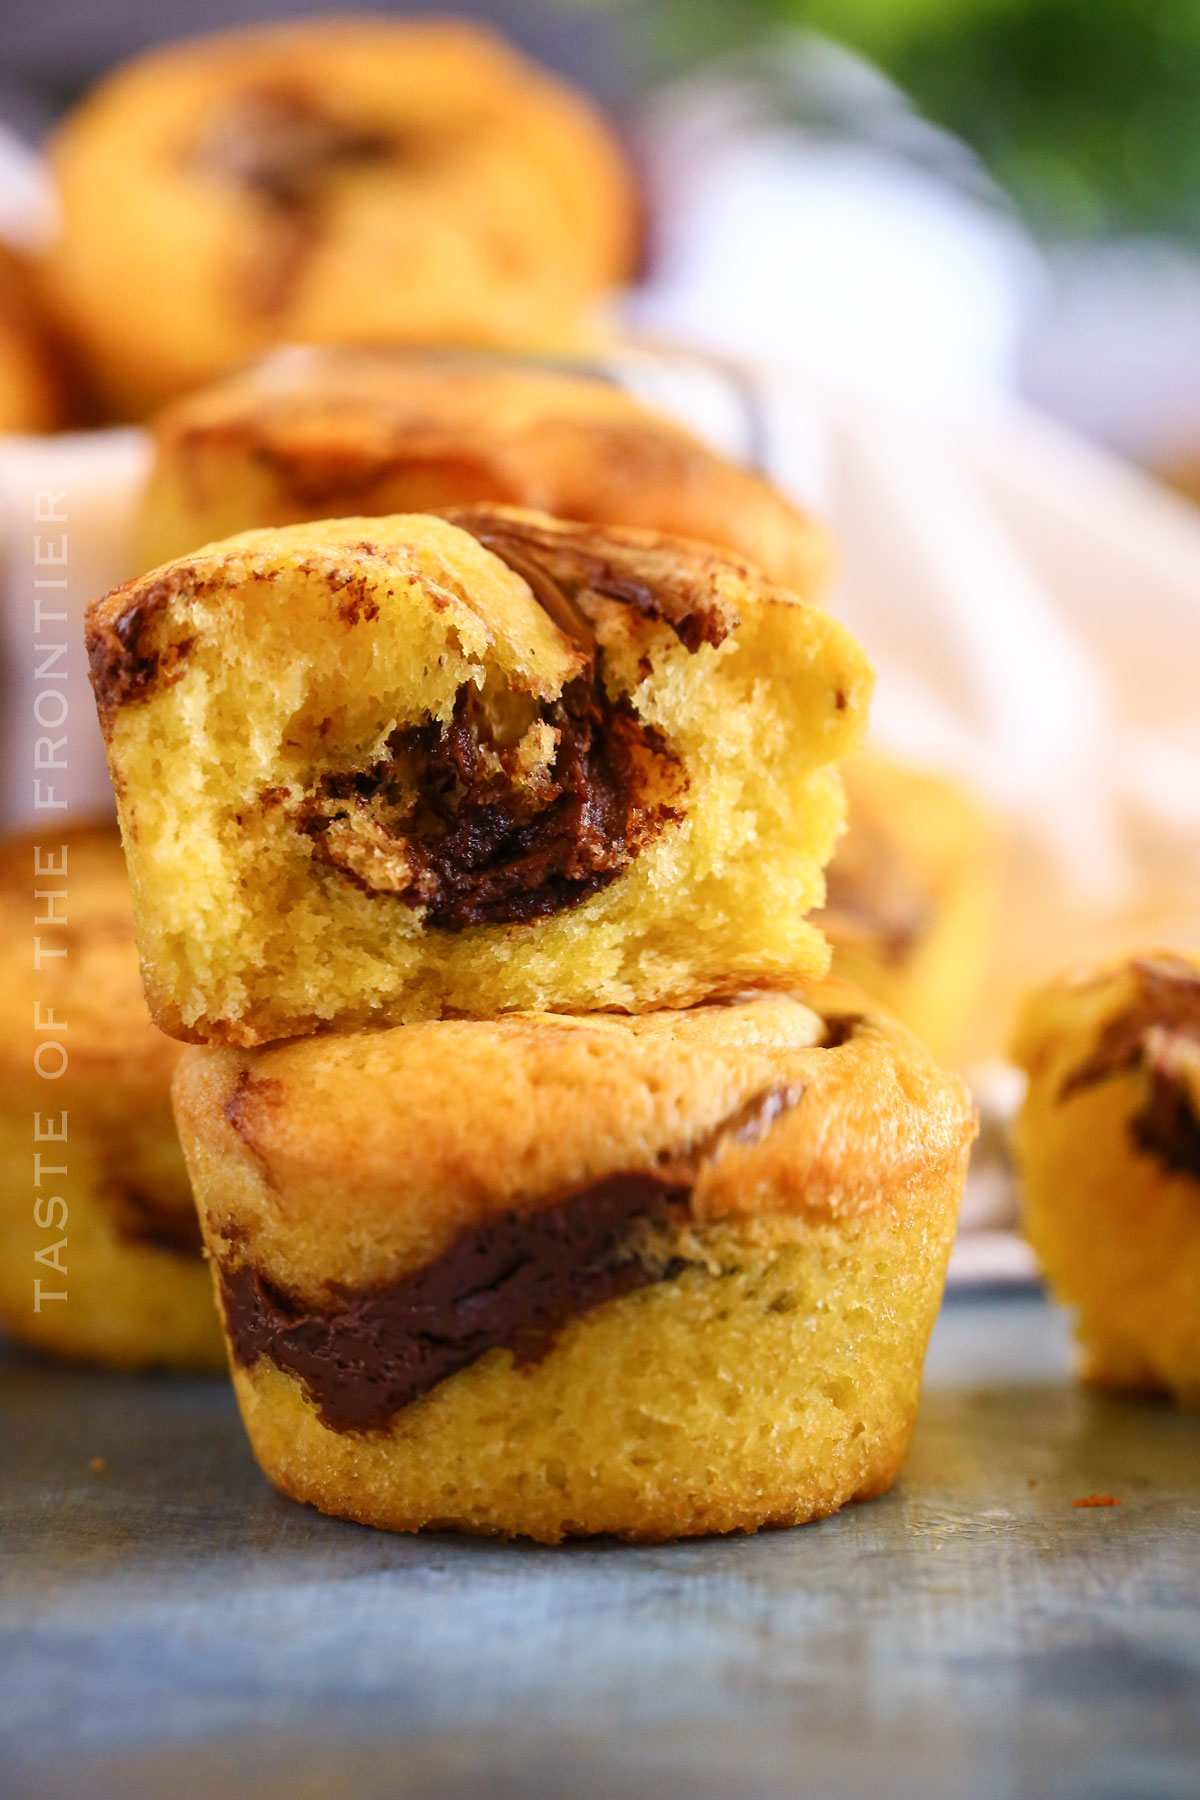 muffins stuffed with Nutella